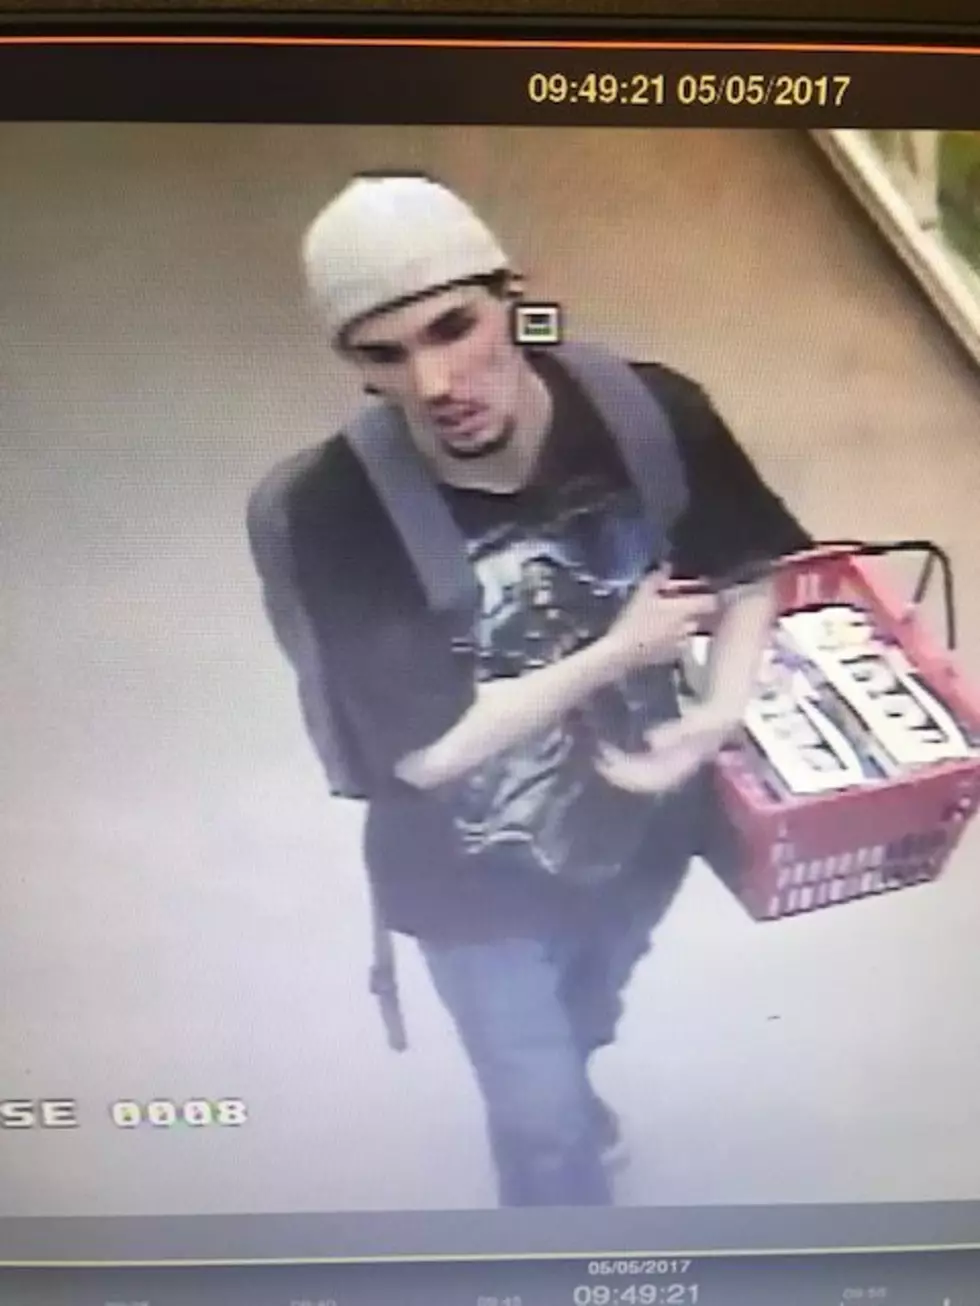 If You Recognize This Person, Please Contact The Augusta Police Department